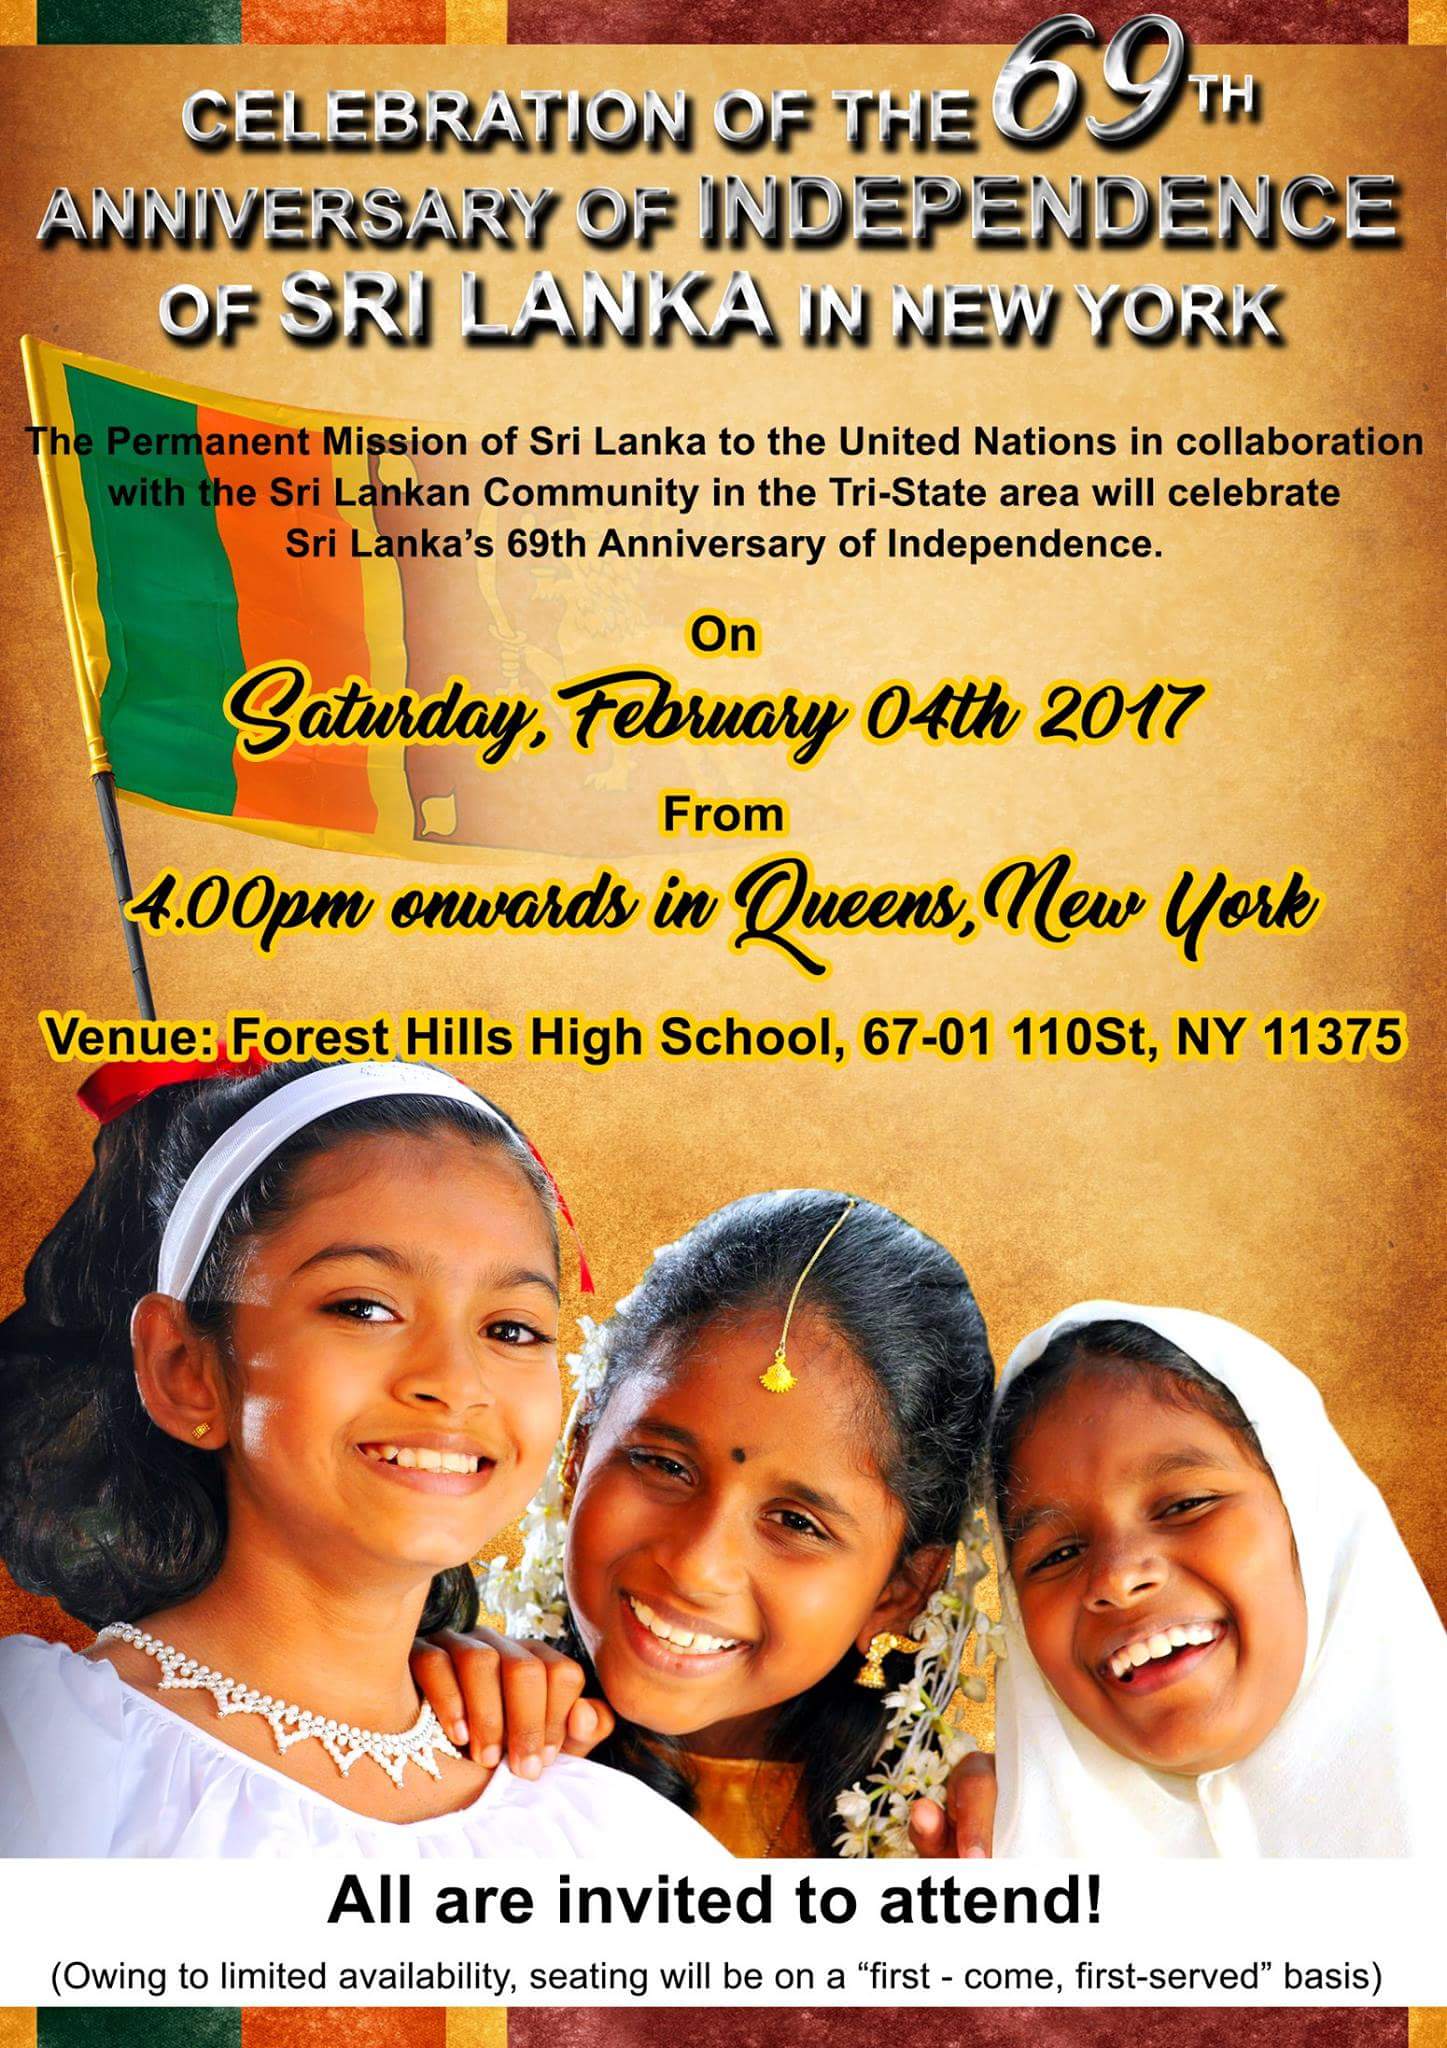 Celebration of the 69th Anniversary of Independence of Sri Lanka in New York